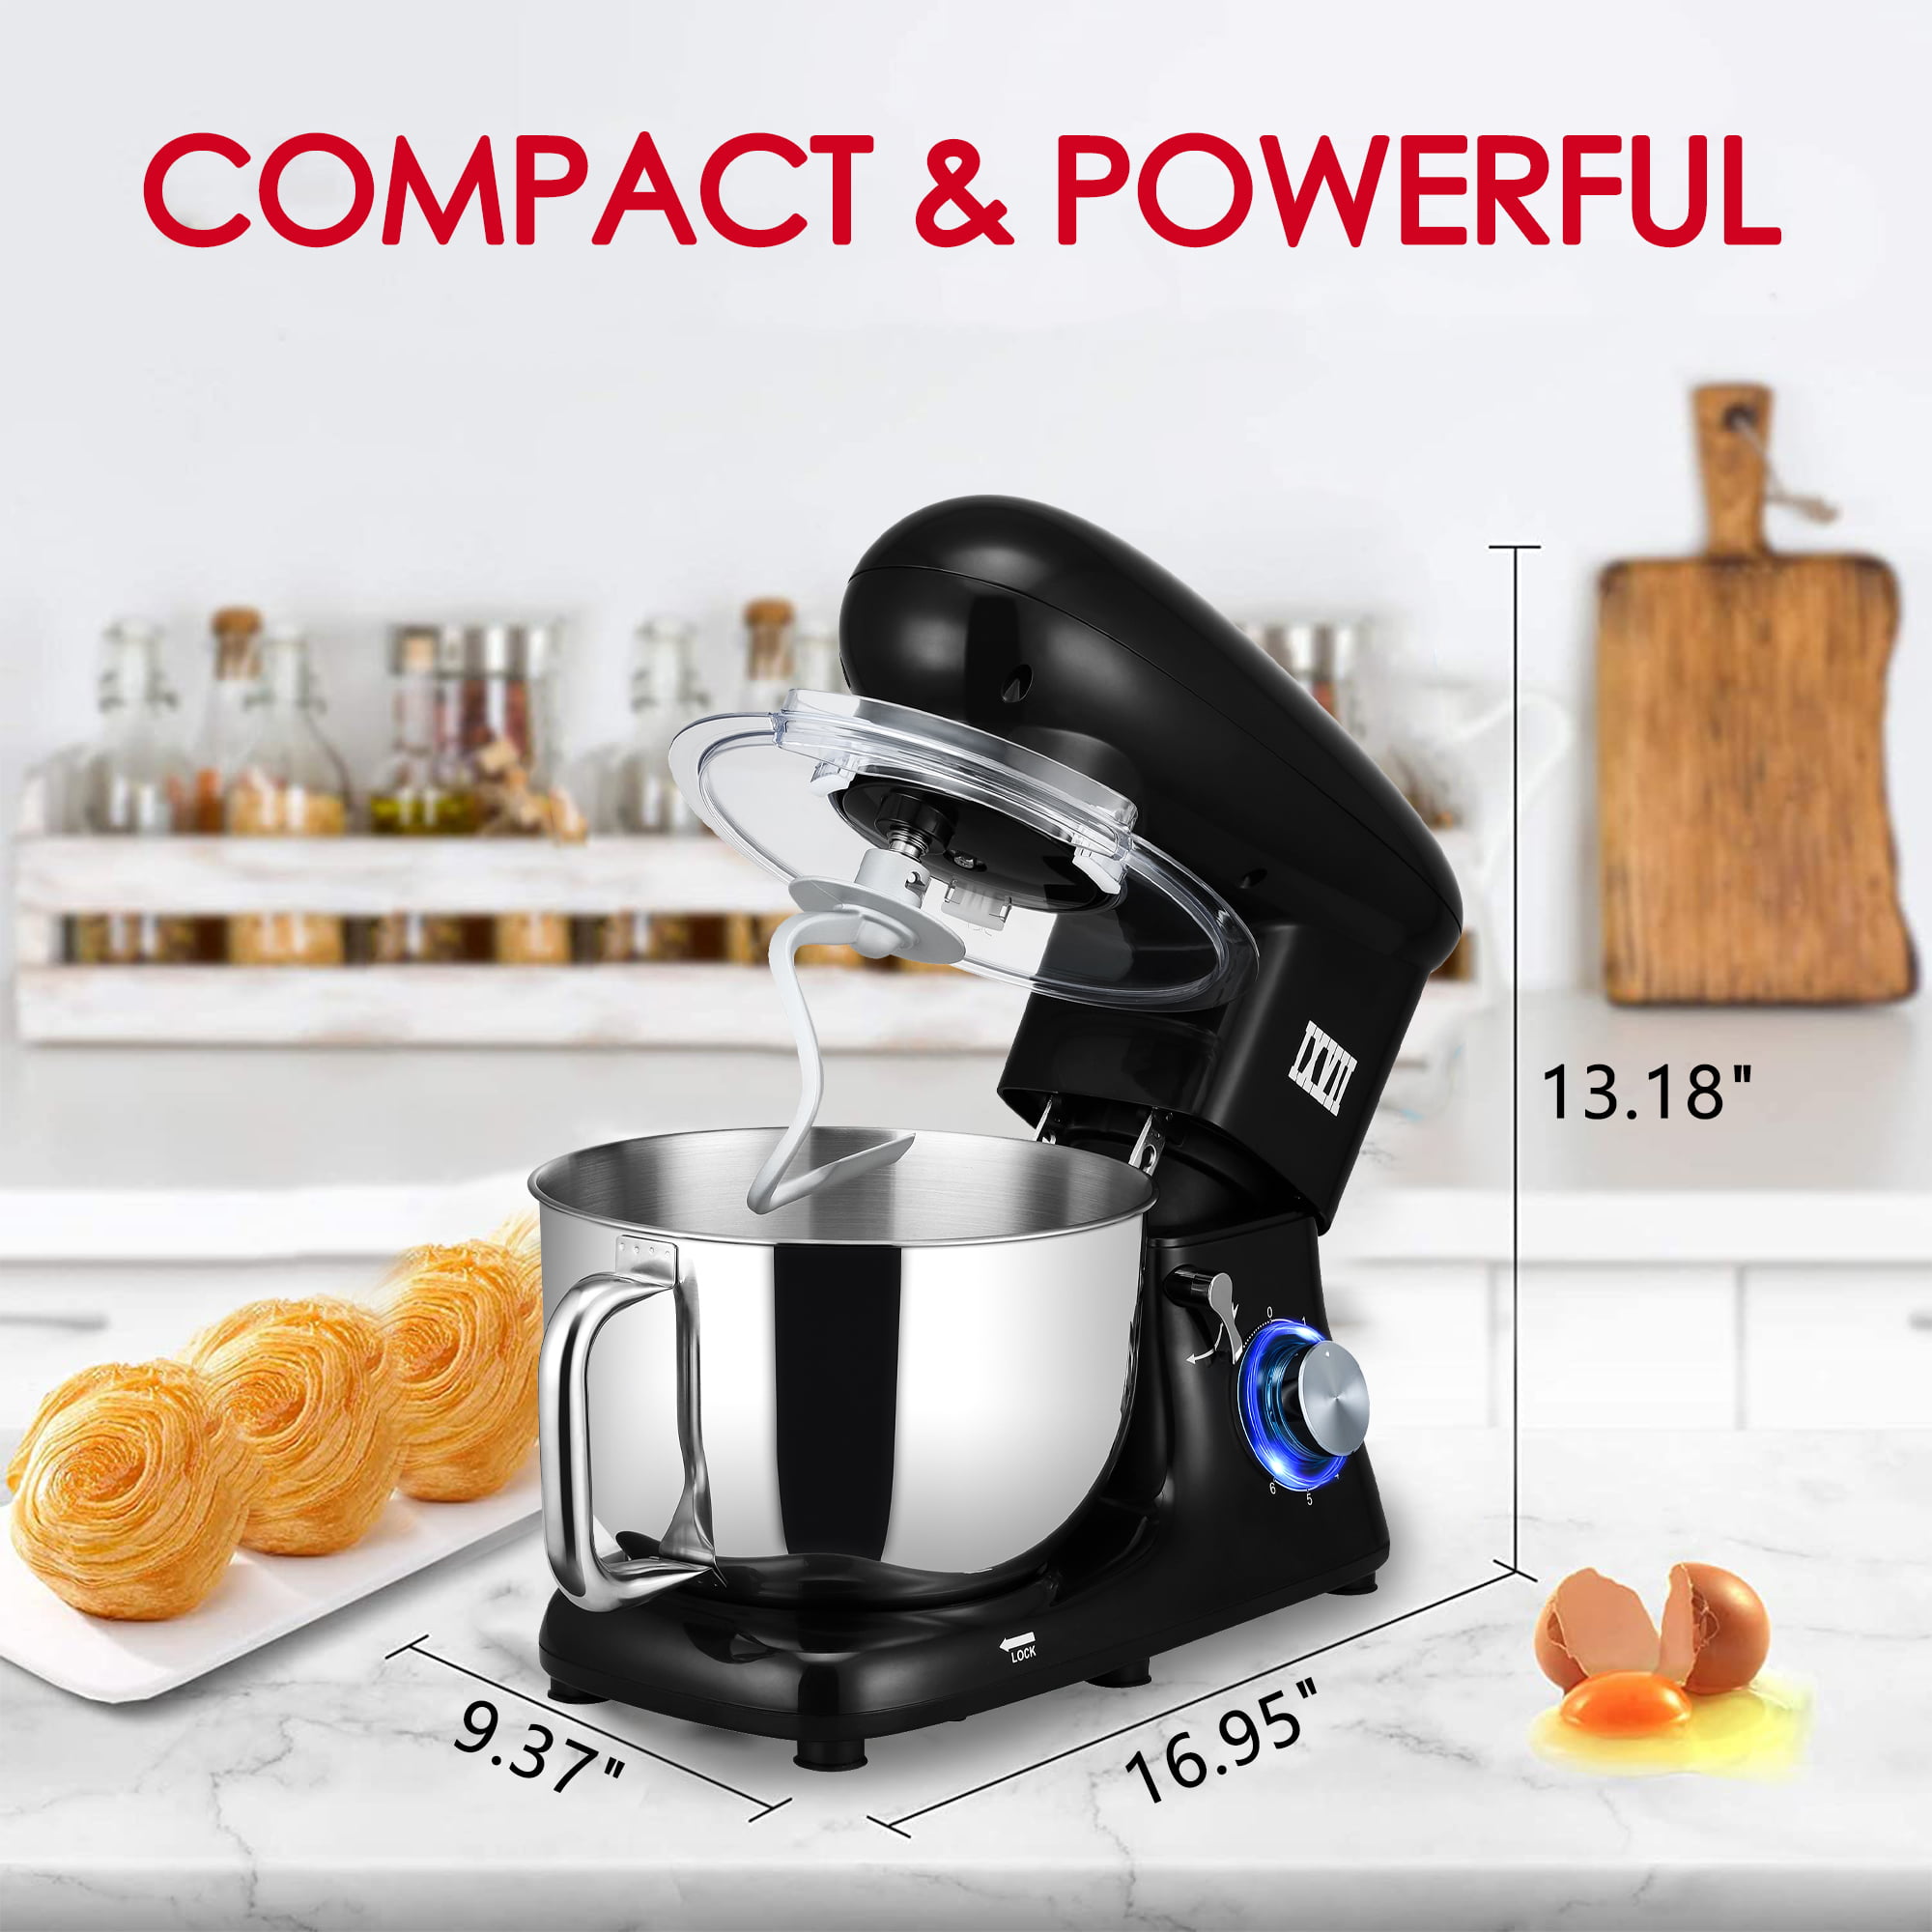  Cake Mixer Stand Mixers 6.5 L Stand Mixers With Stainless Steel  Bowl 1300W High Power Food Mixer With Dough Hook, Whisk, Beater, Glass Jar,  Meat Grinder (Color : Black): Home 